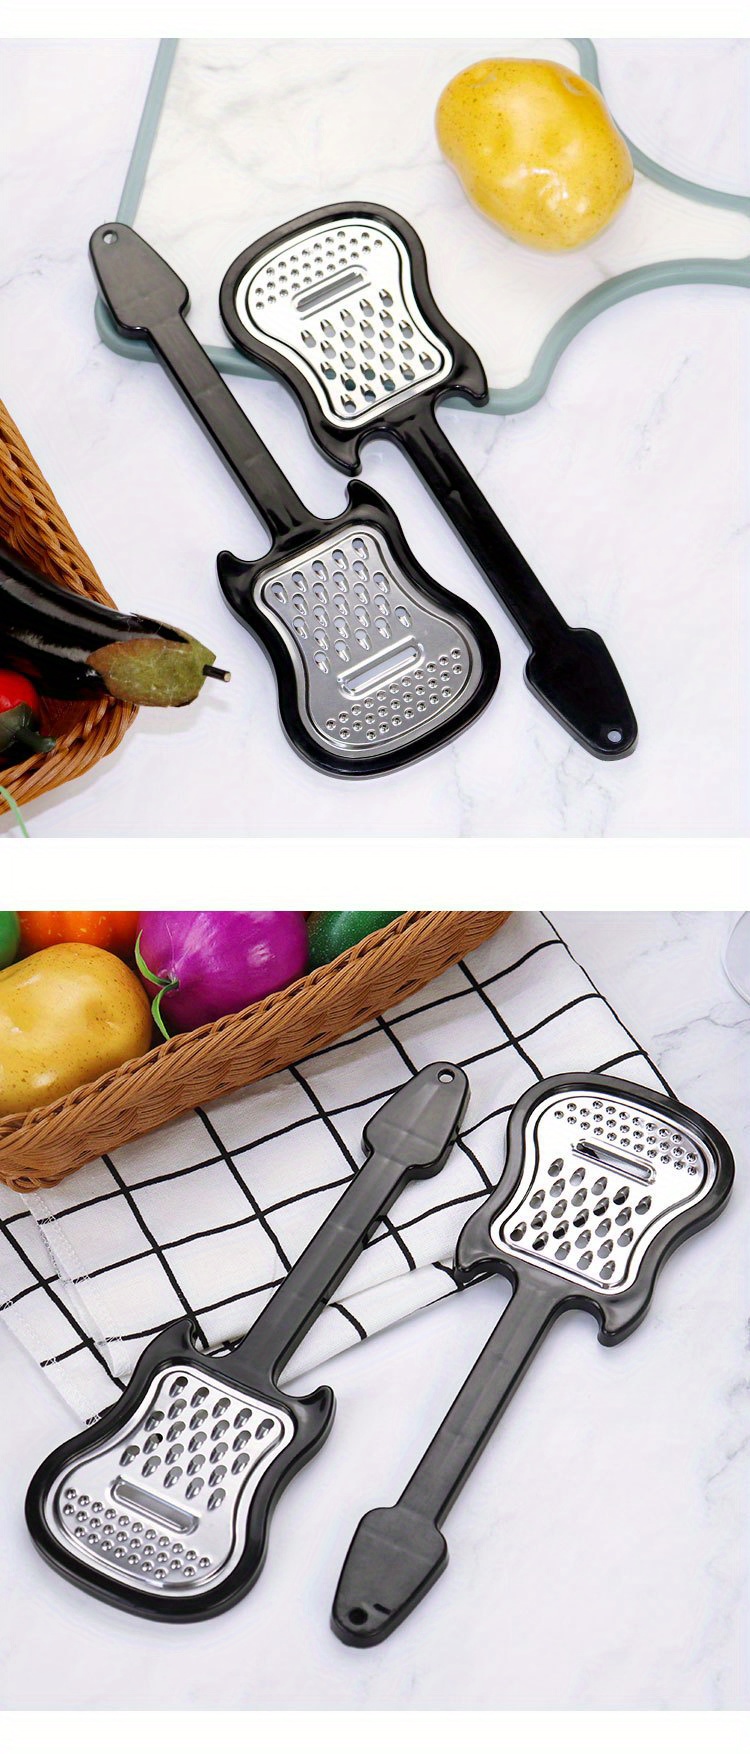 Rotary Cheese Grater, Hand-Operated Mini Stainless Steel Parmesan Cheese  Grater-a Hand-Operated Kitchen Tool for Grating Hard Cheese,Butter, Etc.